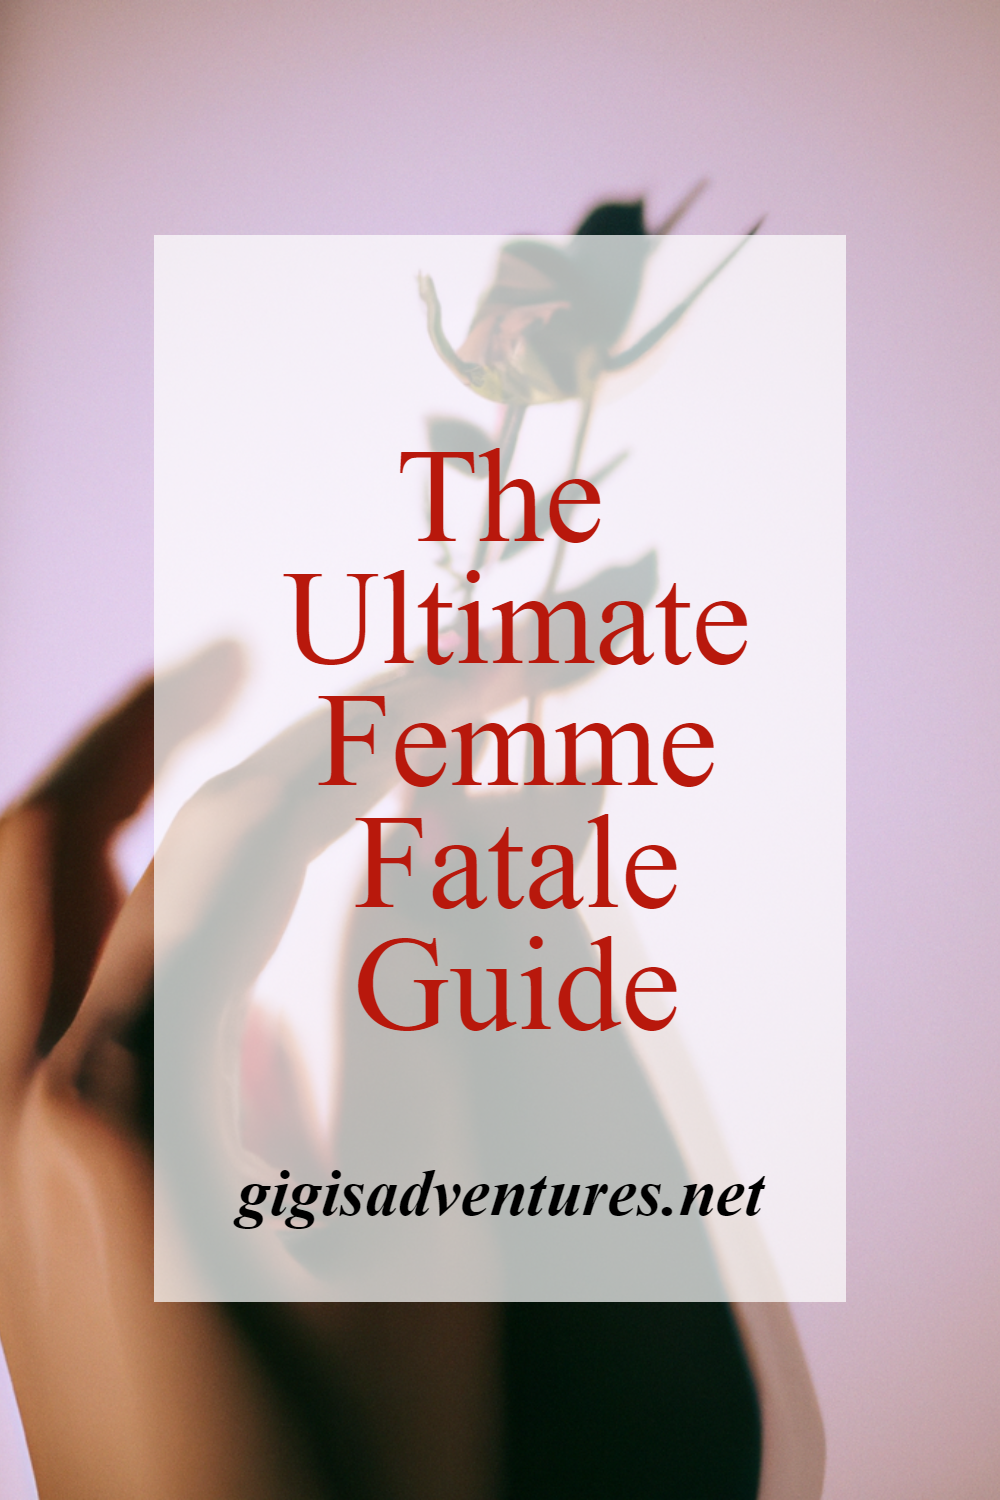 The Ultimate Femme Fatale Guide